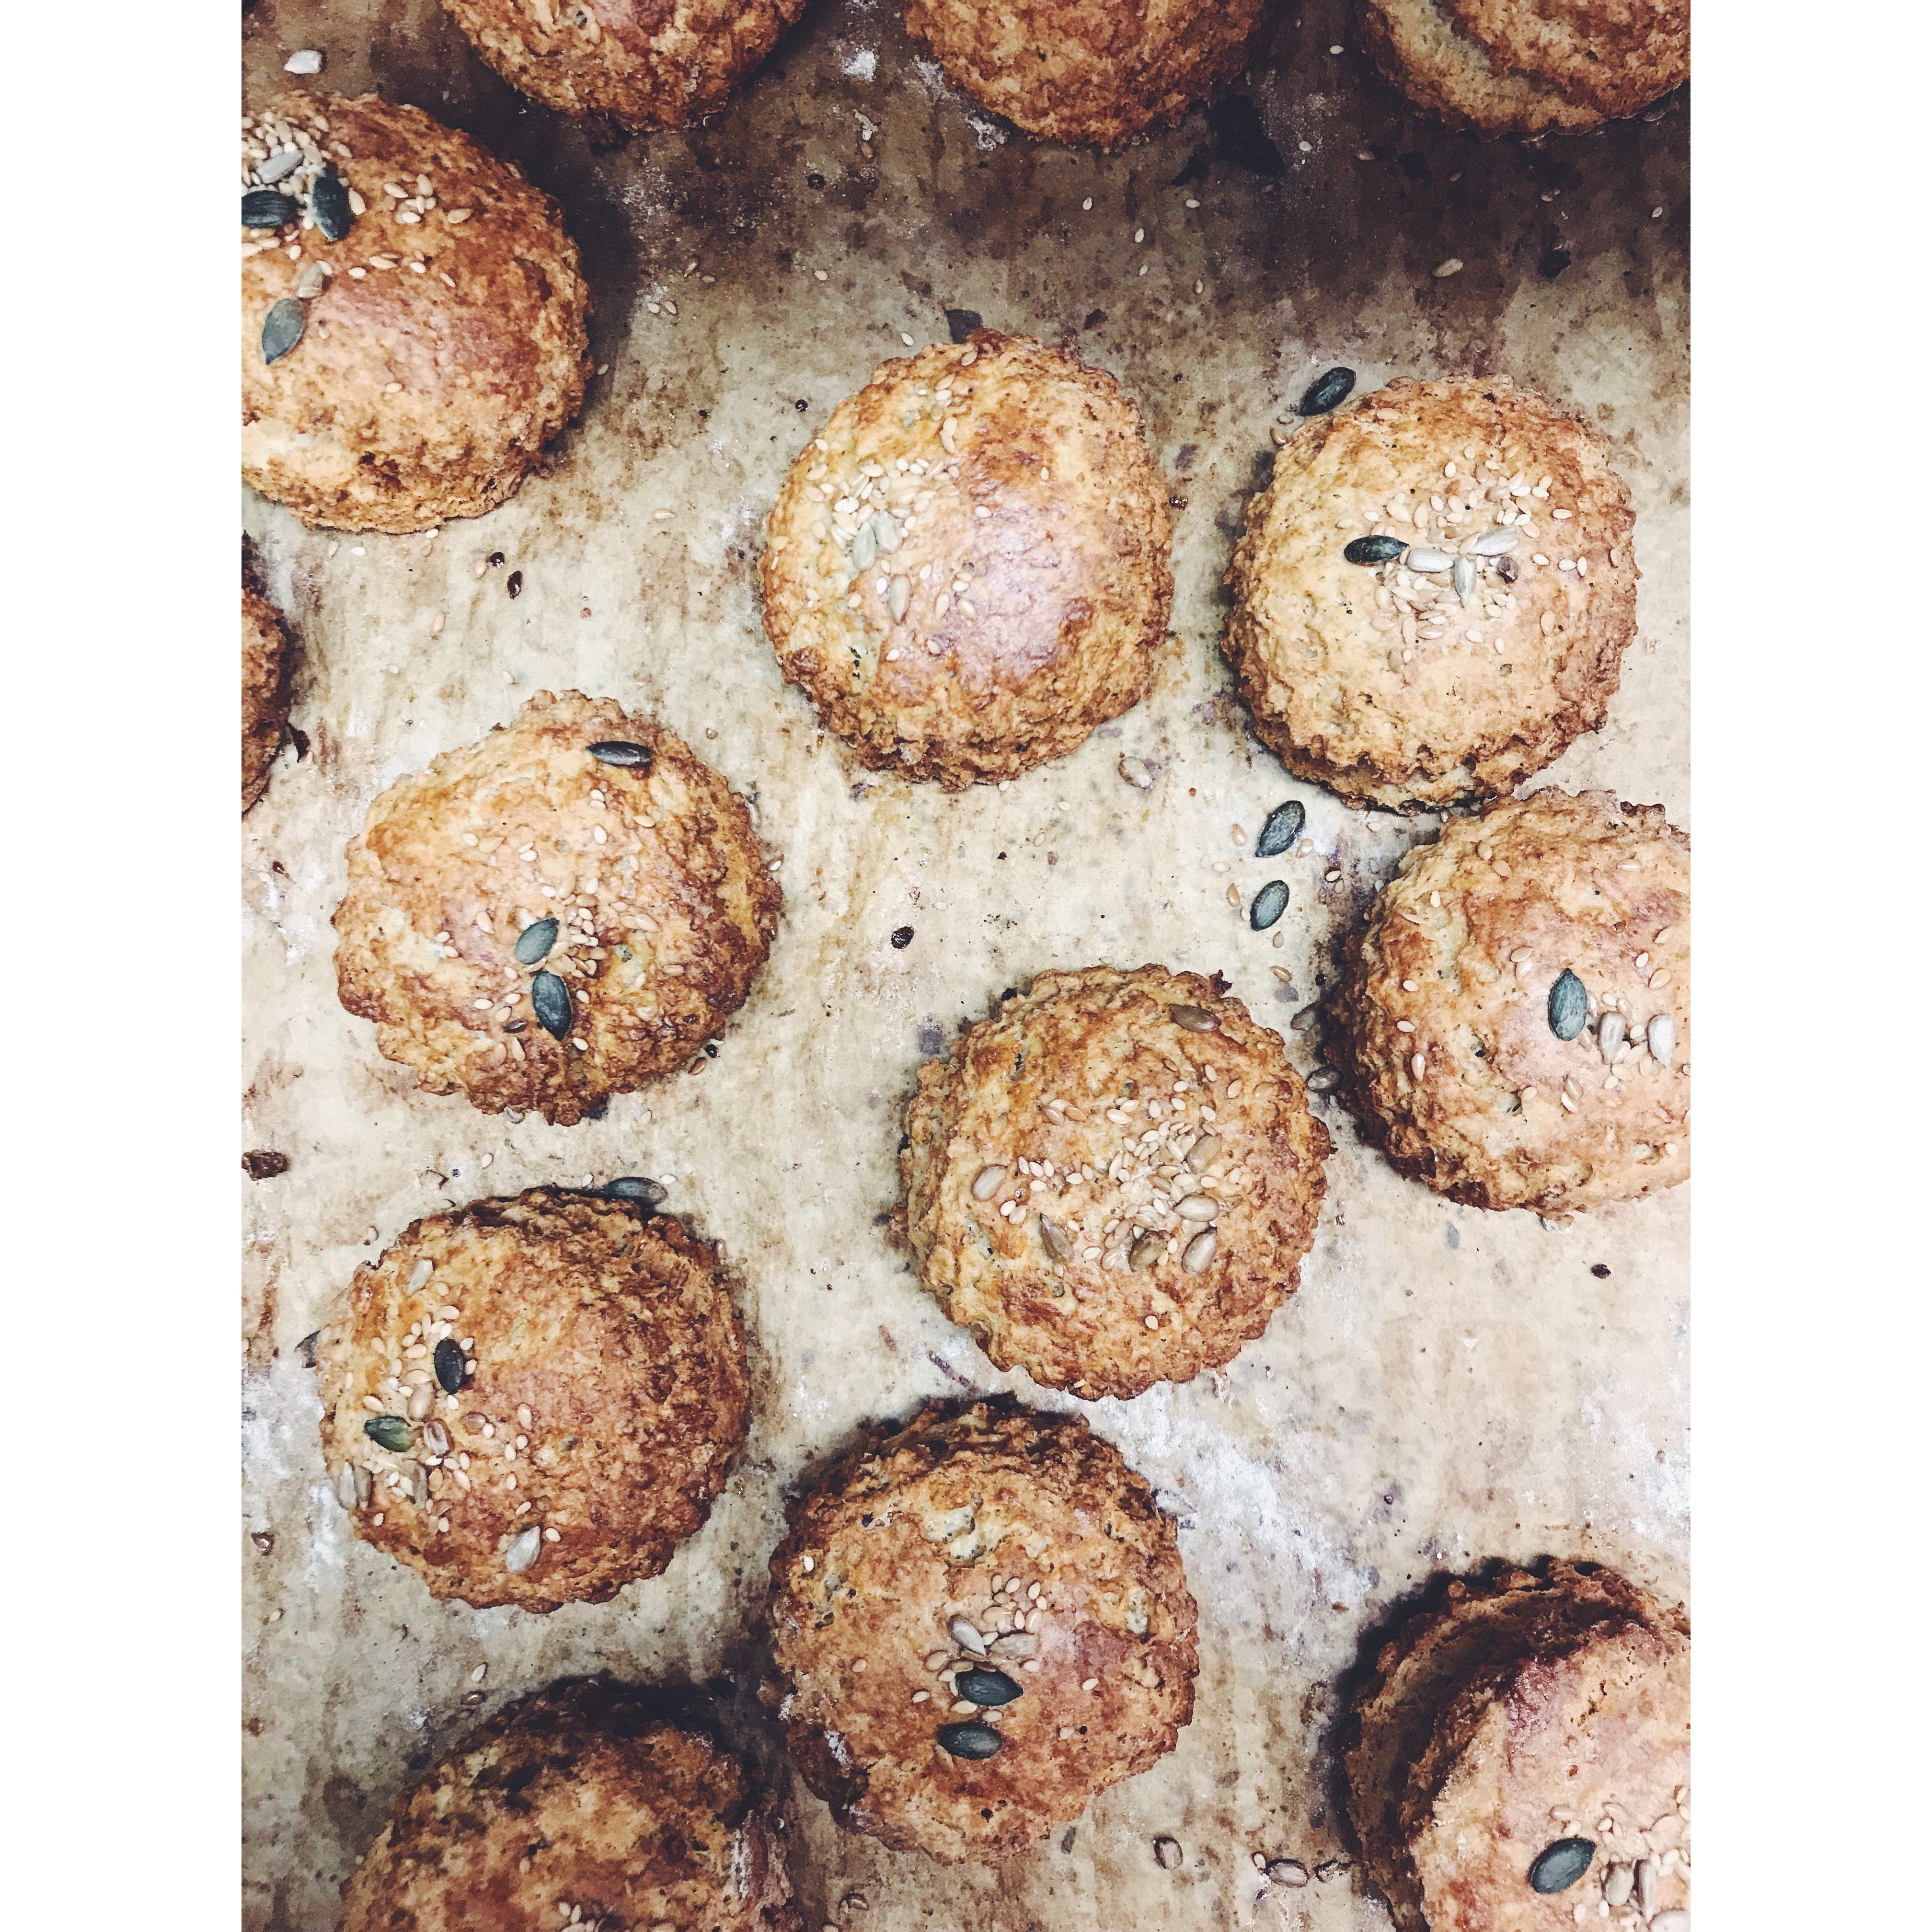 Saturday Only -Wholemeal Seeded Scones (2 Pack) - Kate's Kitchen